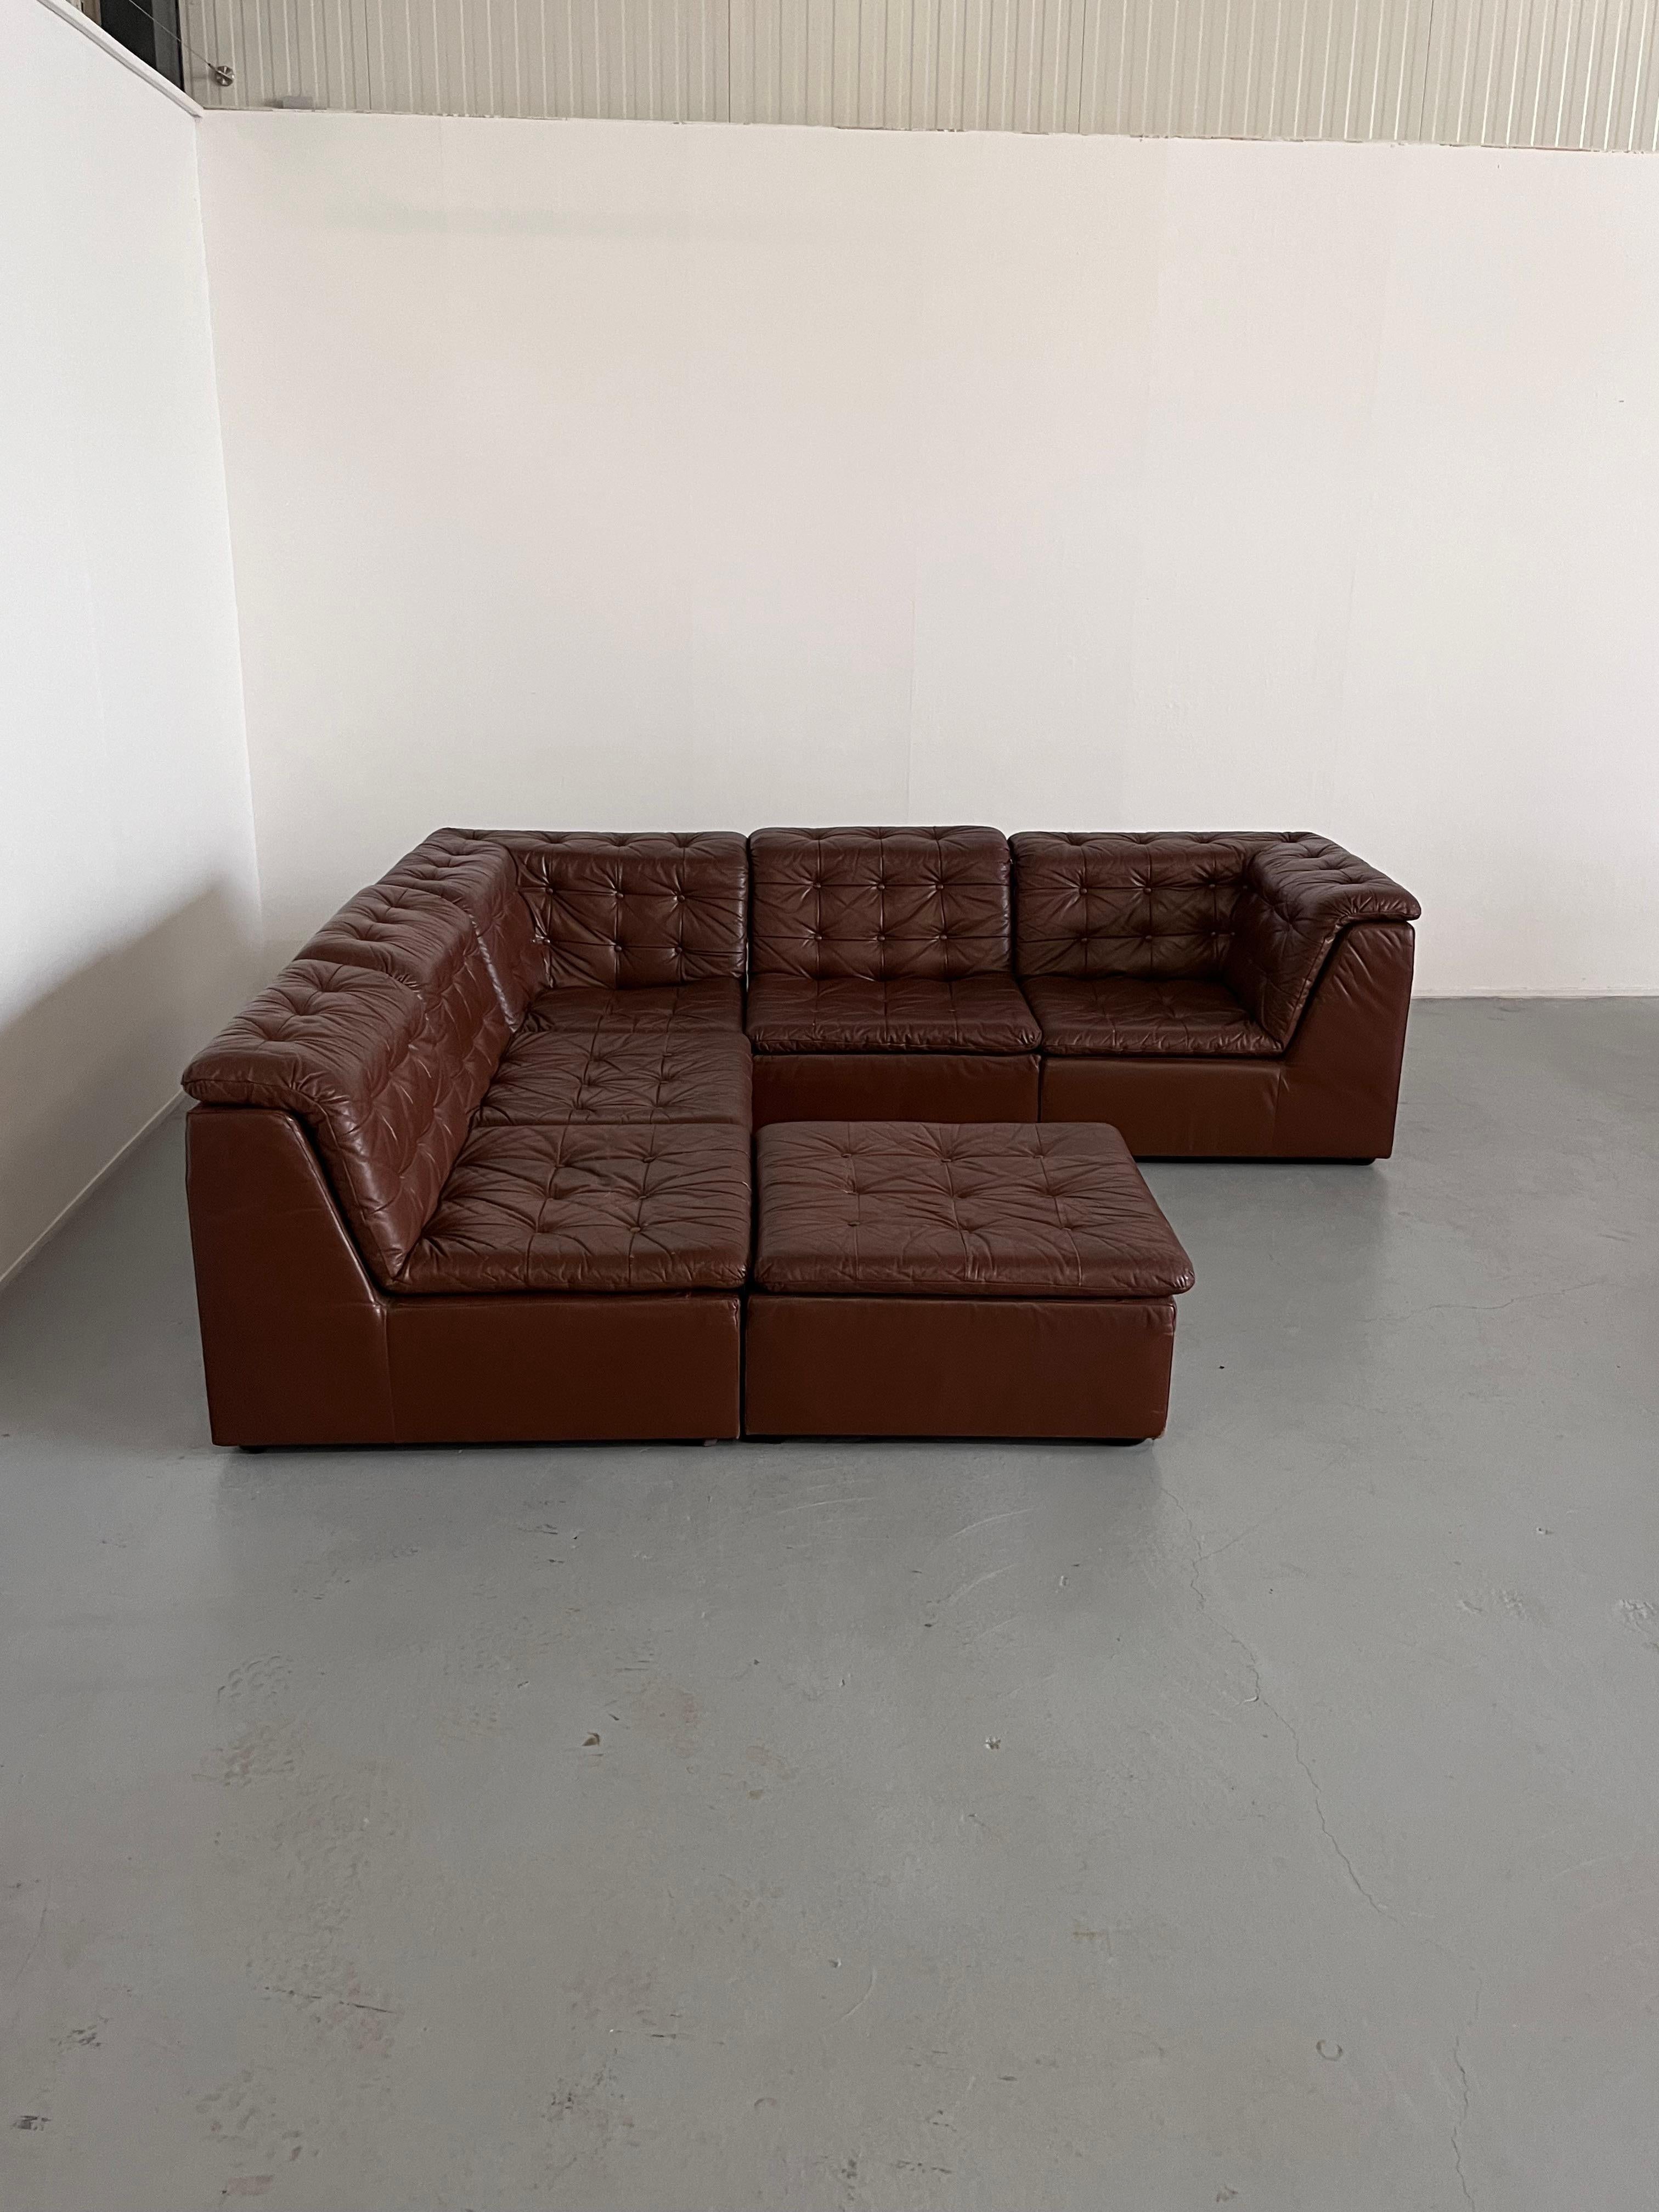 Late 20th Century Vintage Patchwork Cognac Leather Six-Part Modular Sofa by Laauser, 1970s Germany For Sale